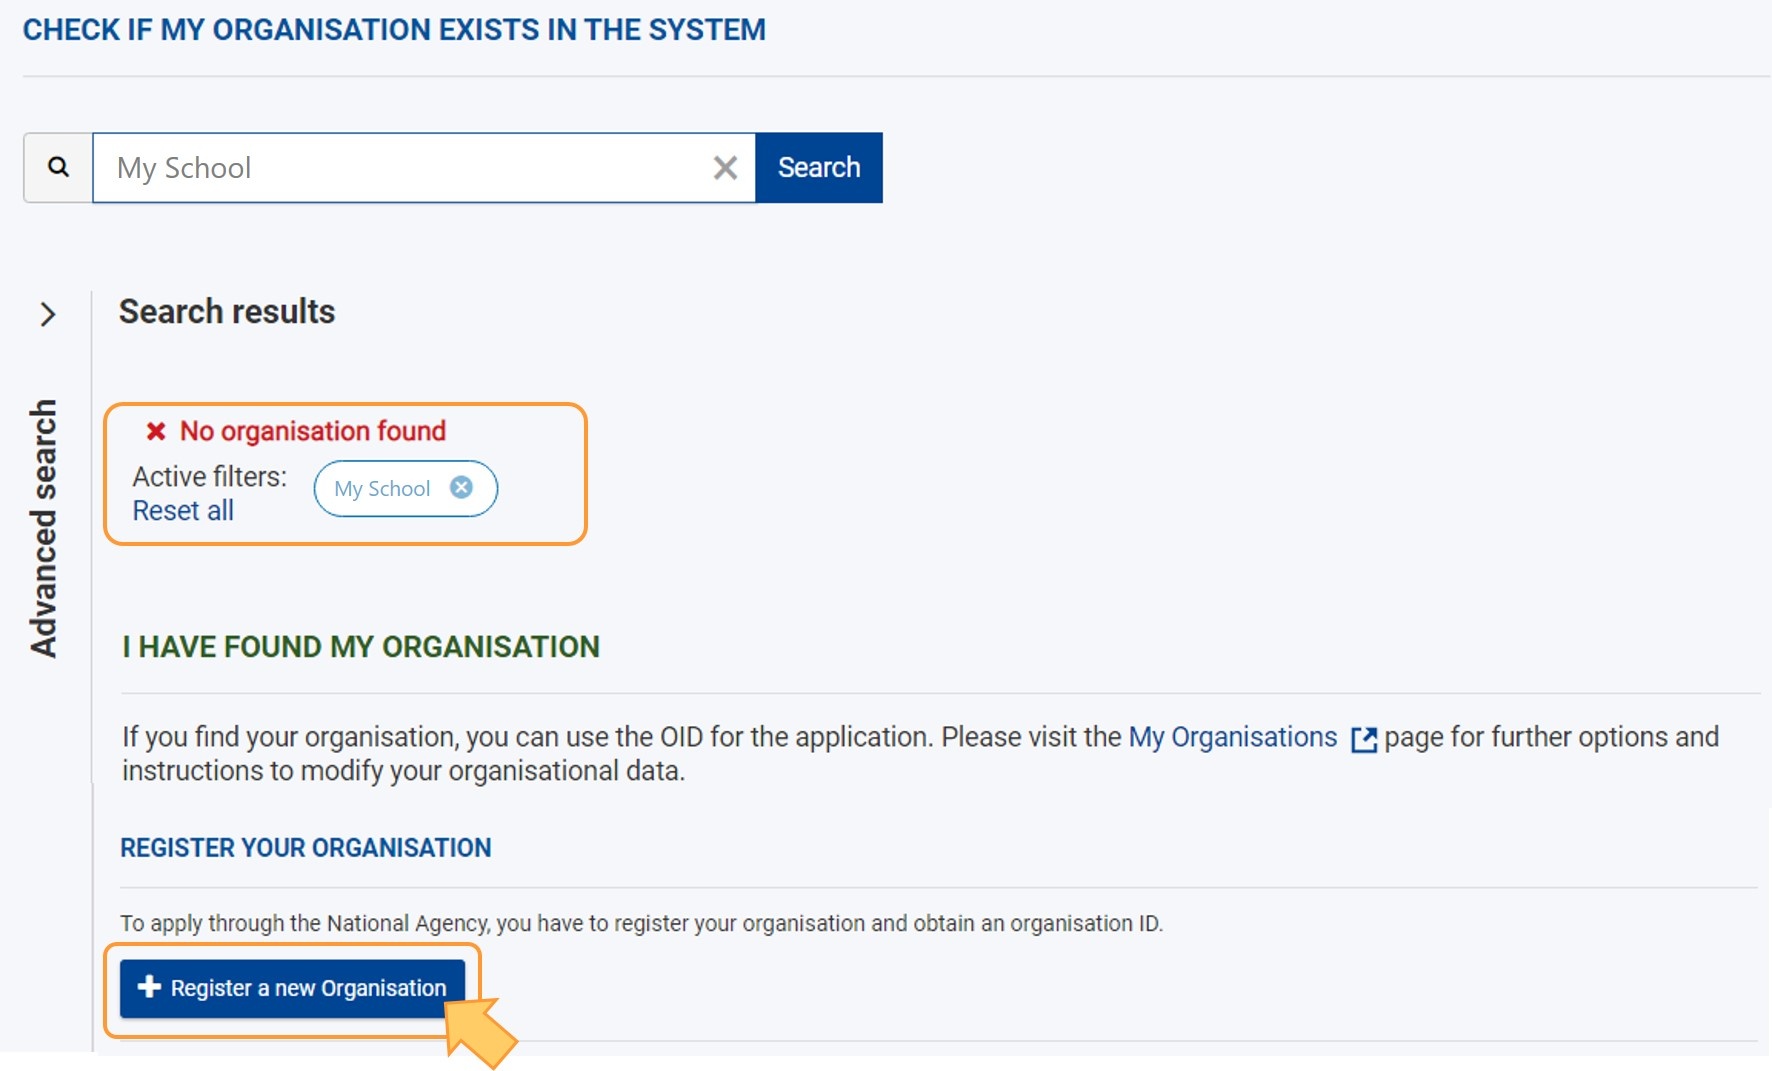 Search for organisation - organisation not registered